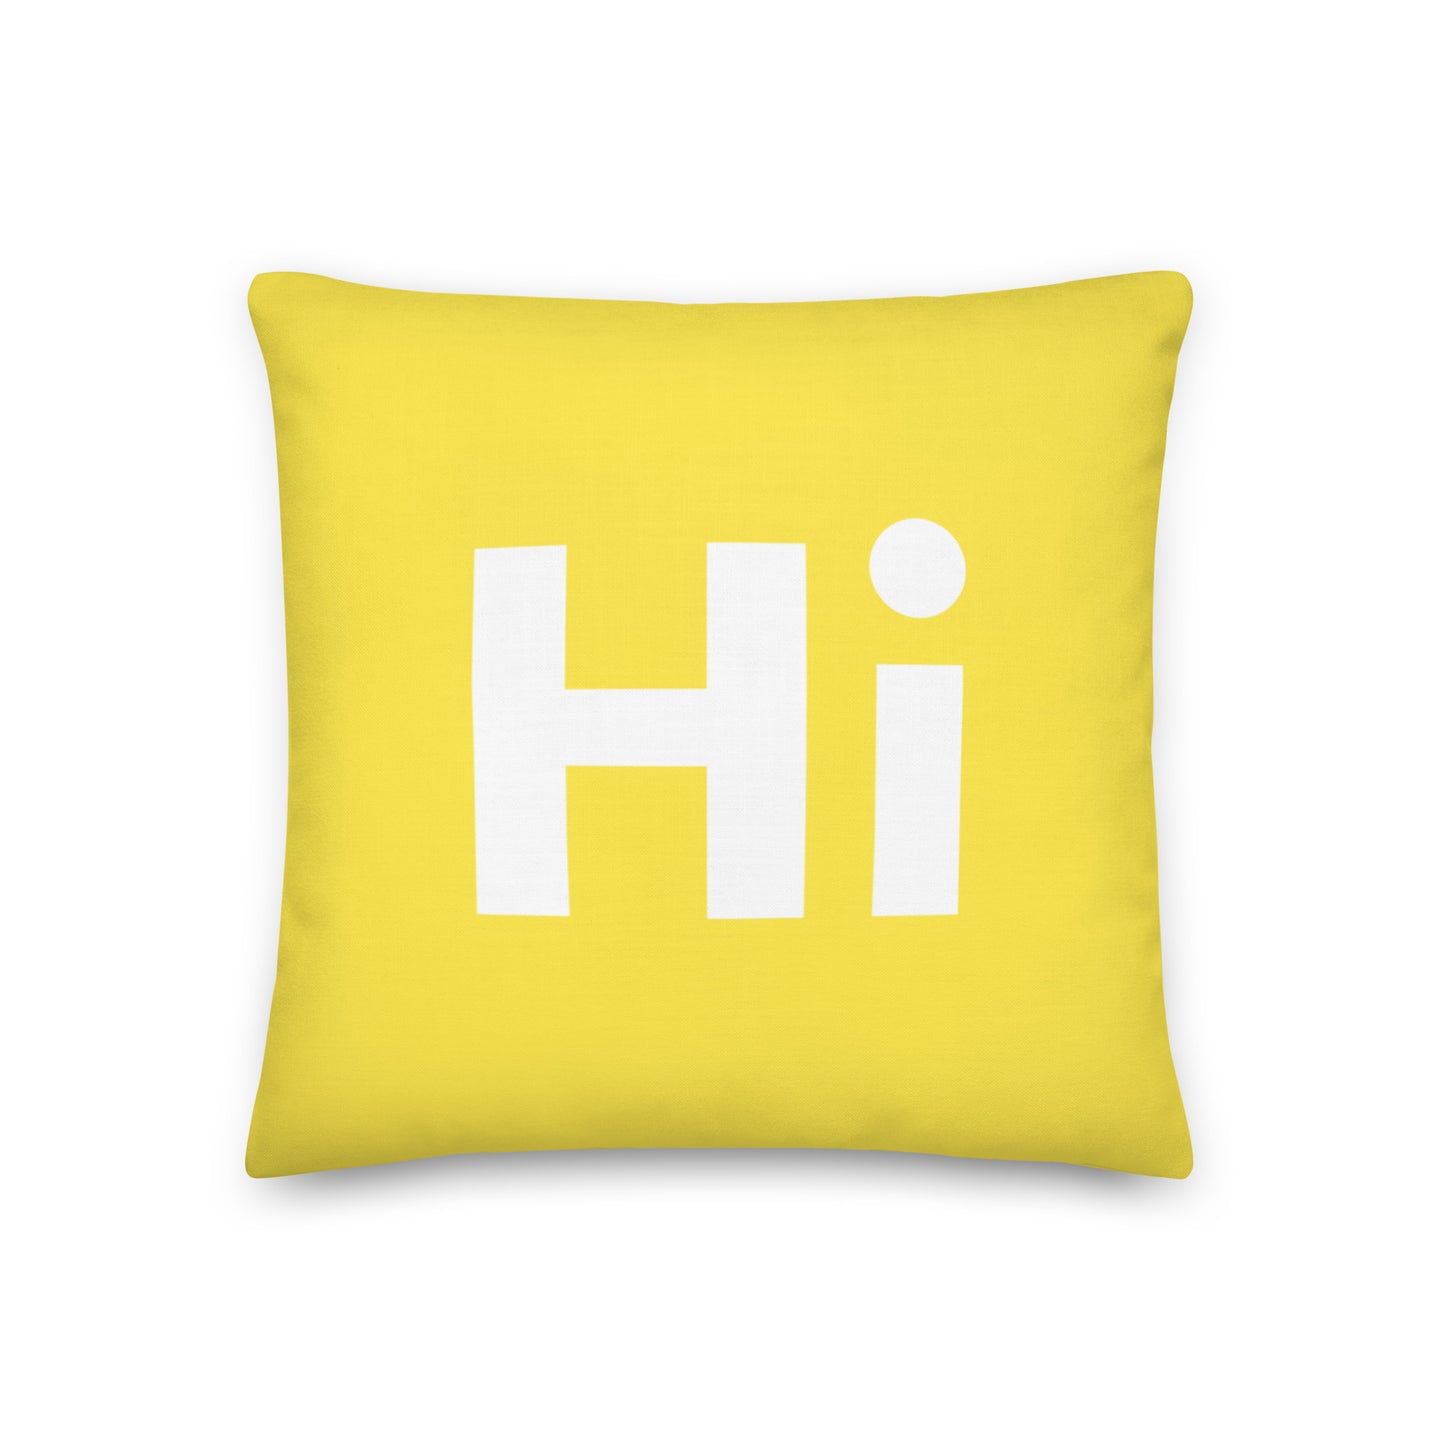 Hi Pillow in yellow by HiJohnny.com